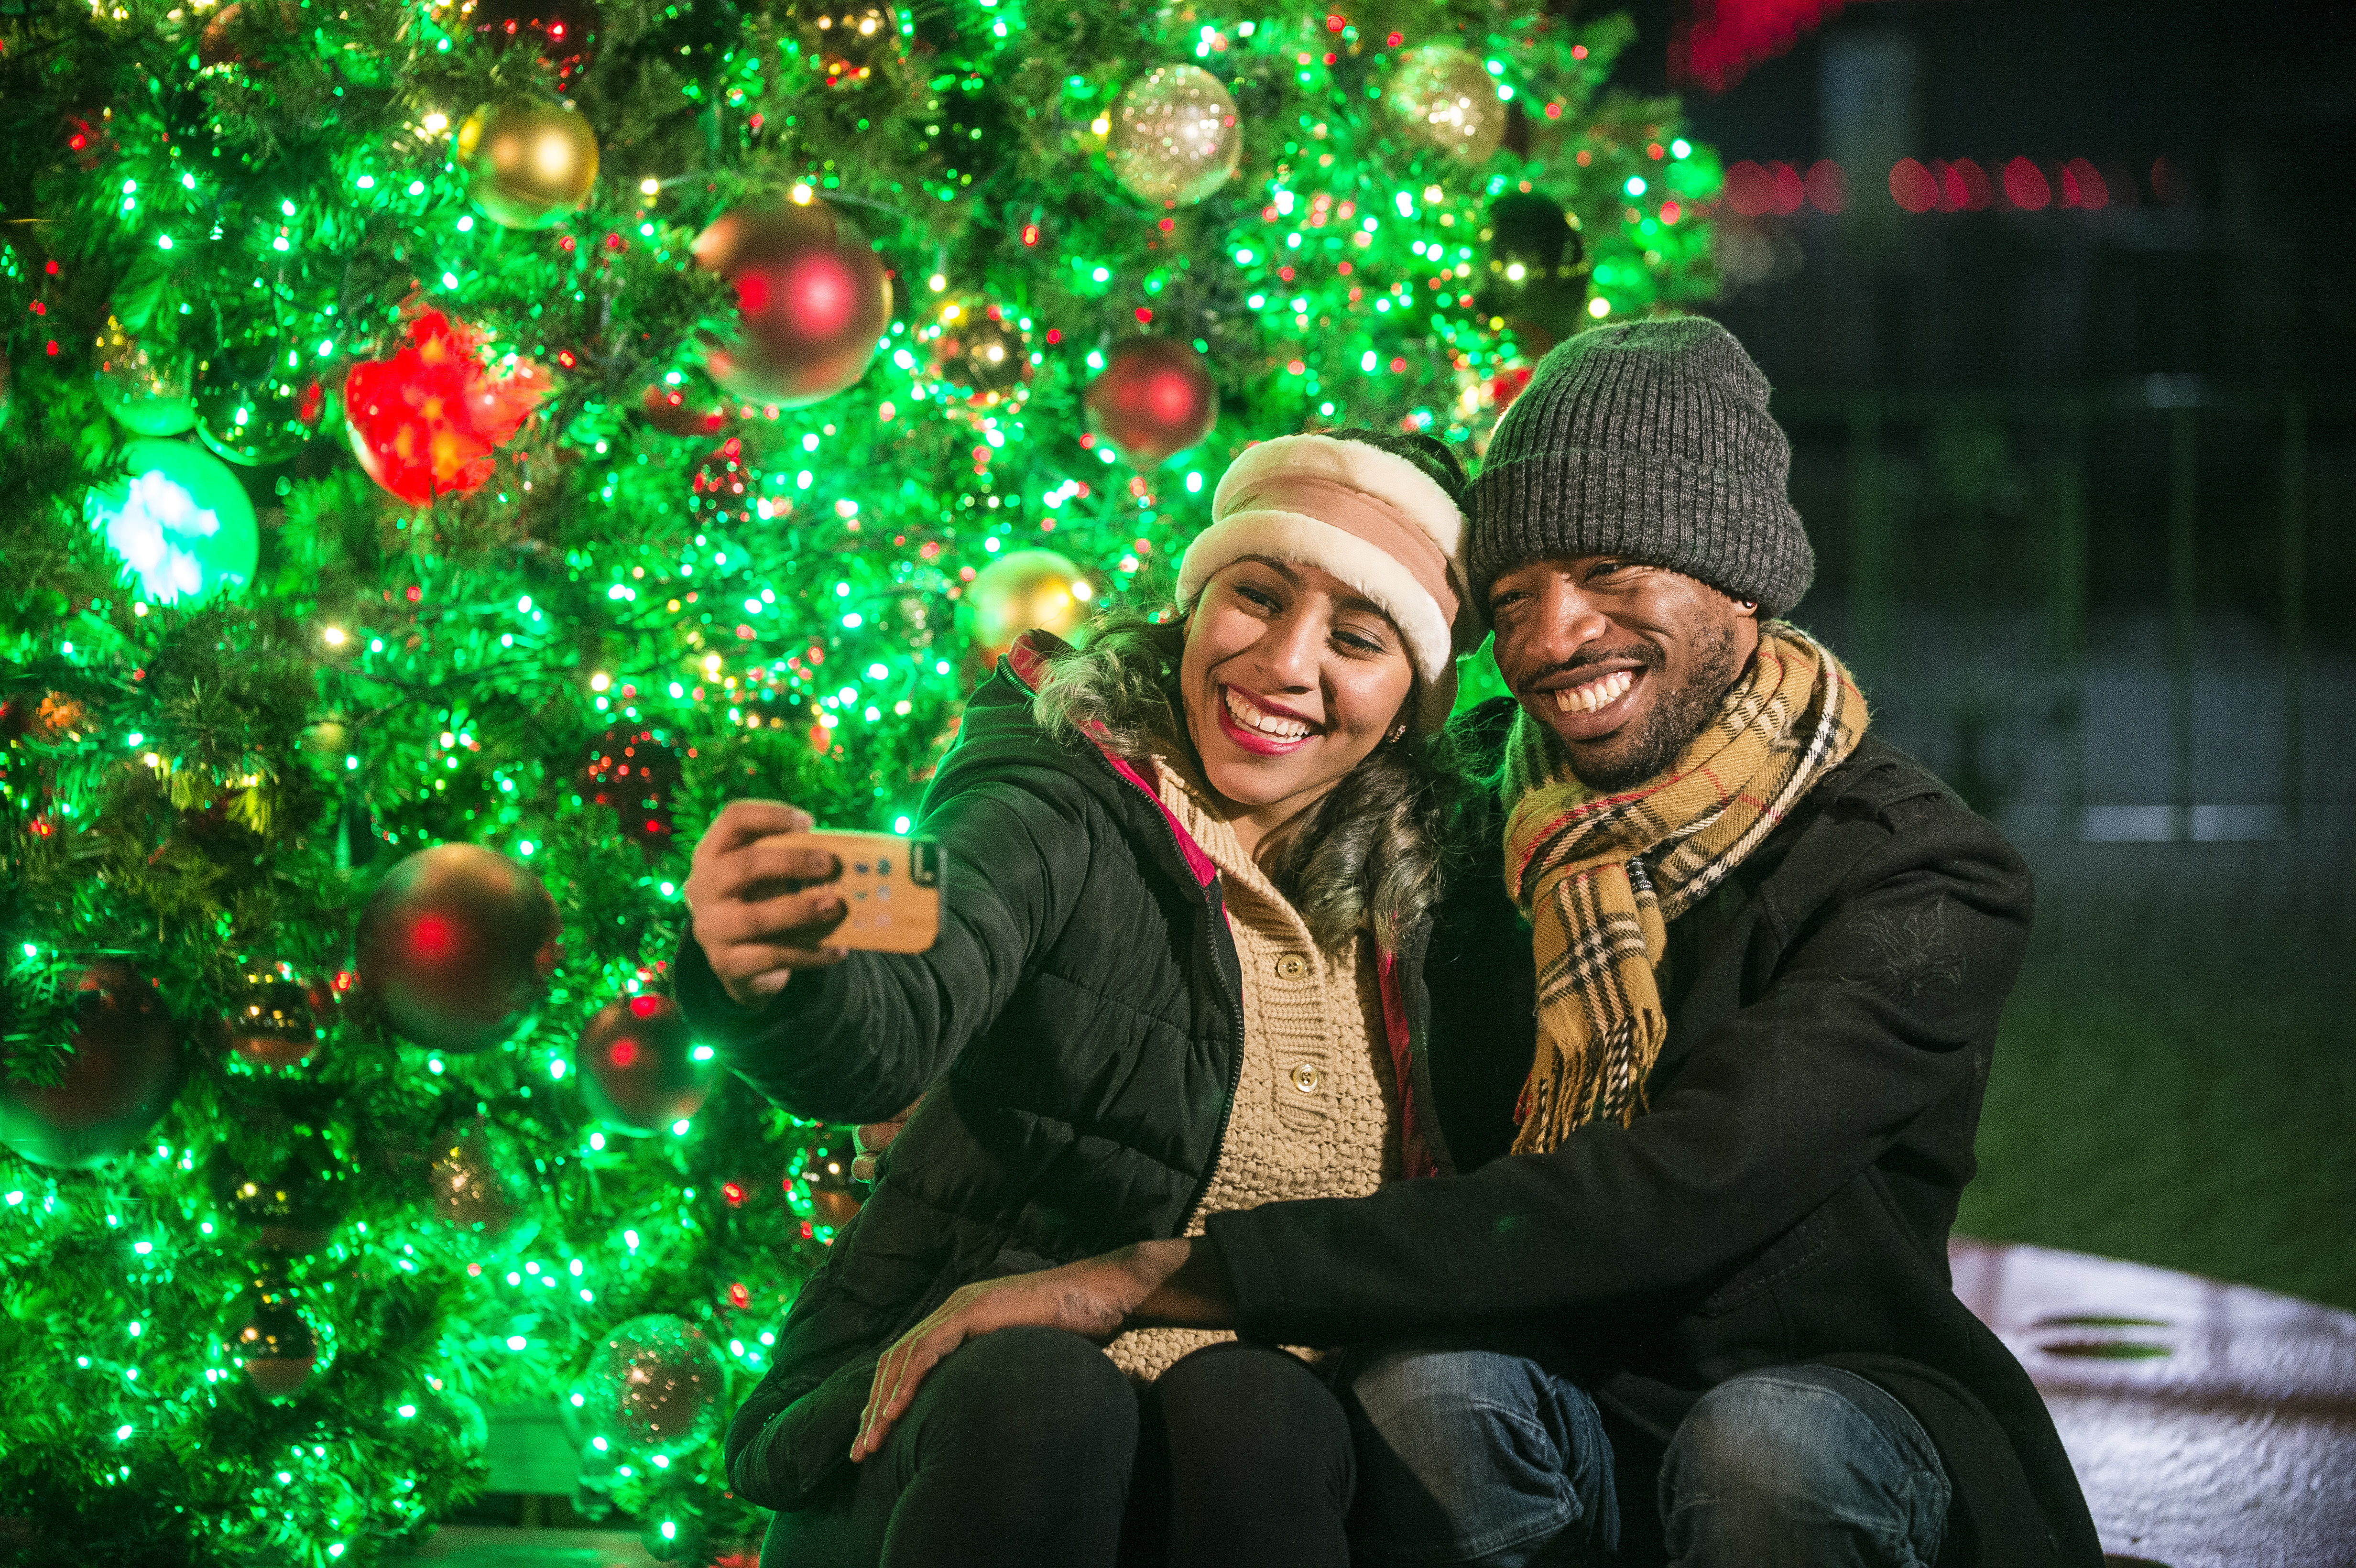 Holiday in the Park Brings Festive Cheer to Six Flags Over Georgia